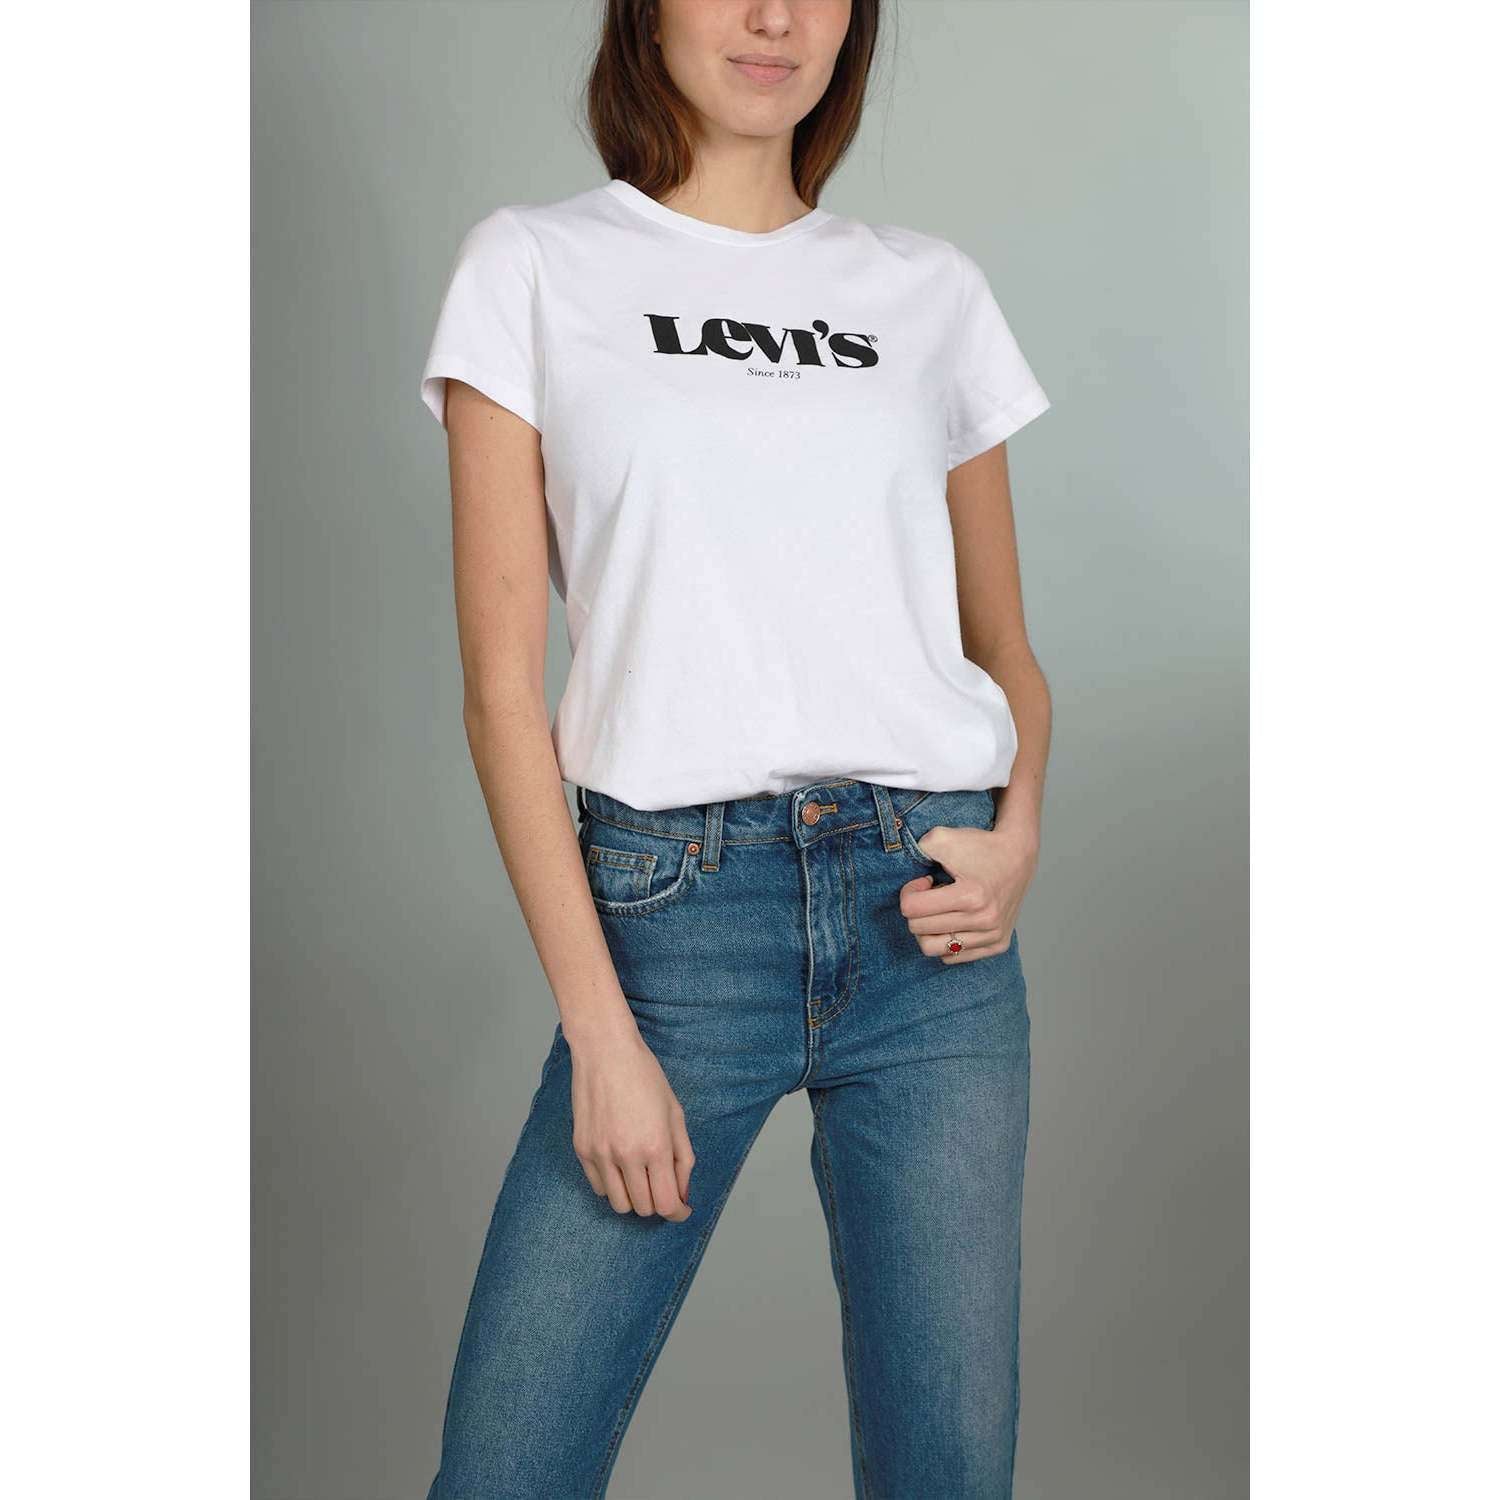 LEVI'S donna t-shirt the perfect tee